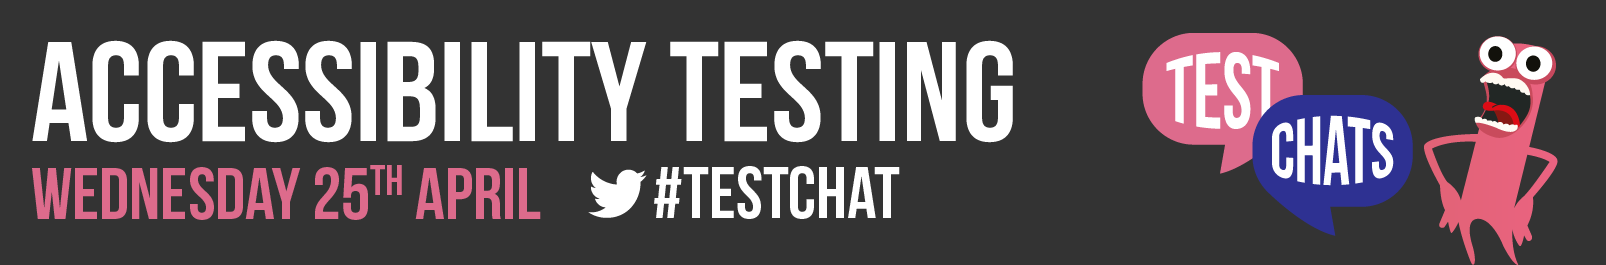 #TestChat - Accessibility Testing banner image